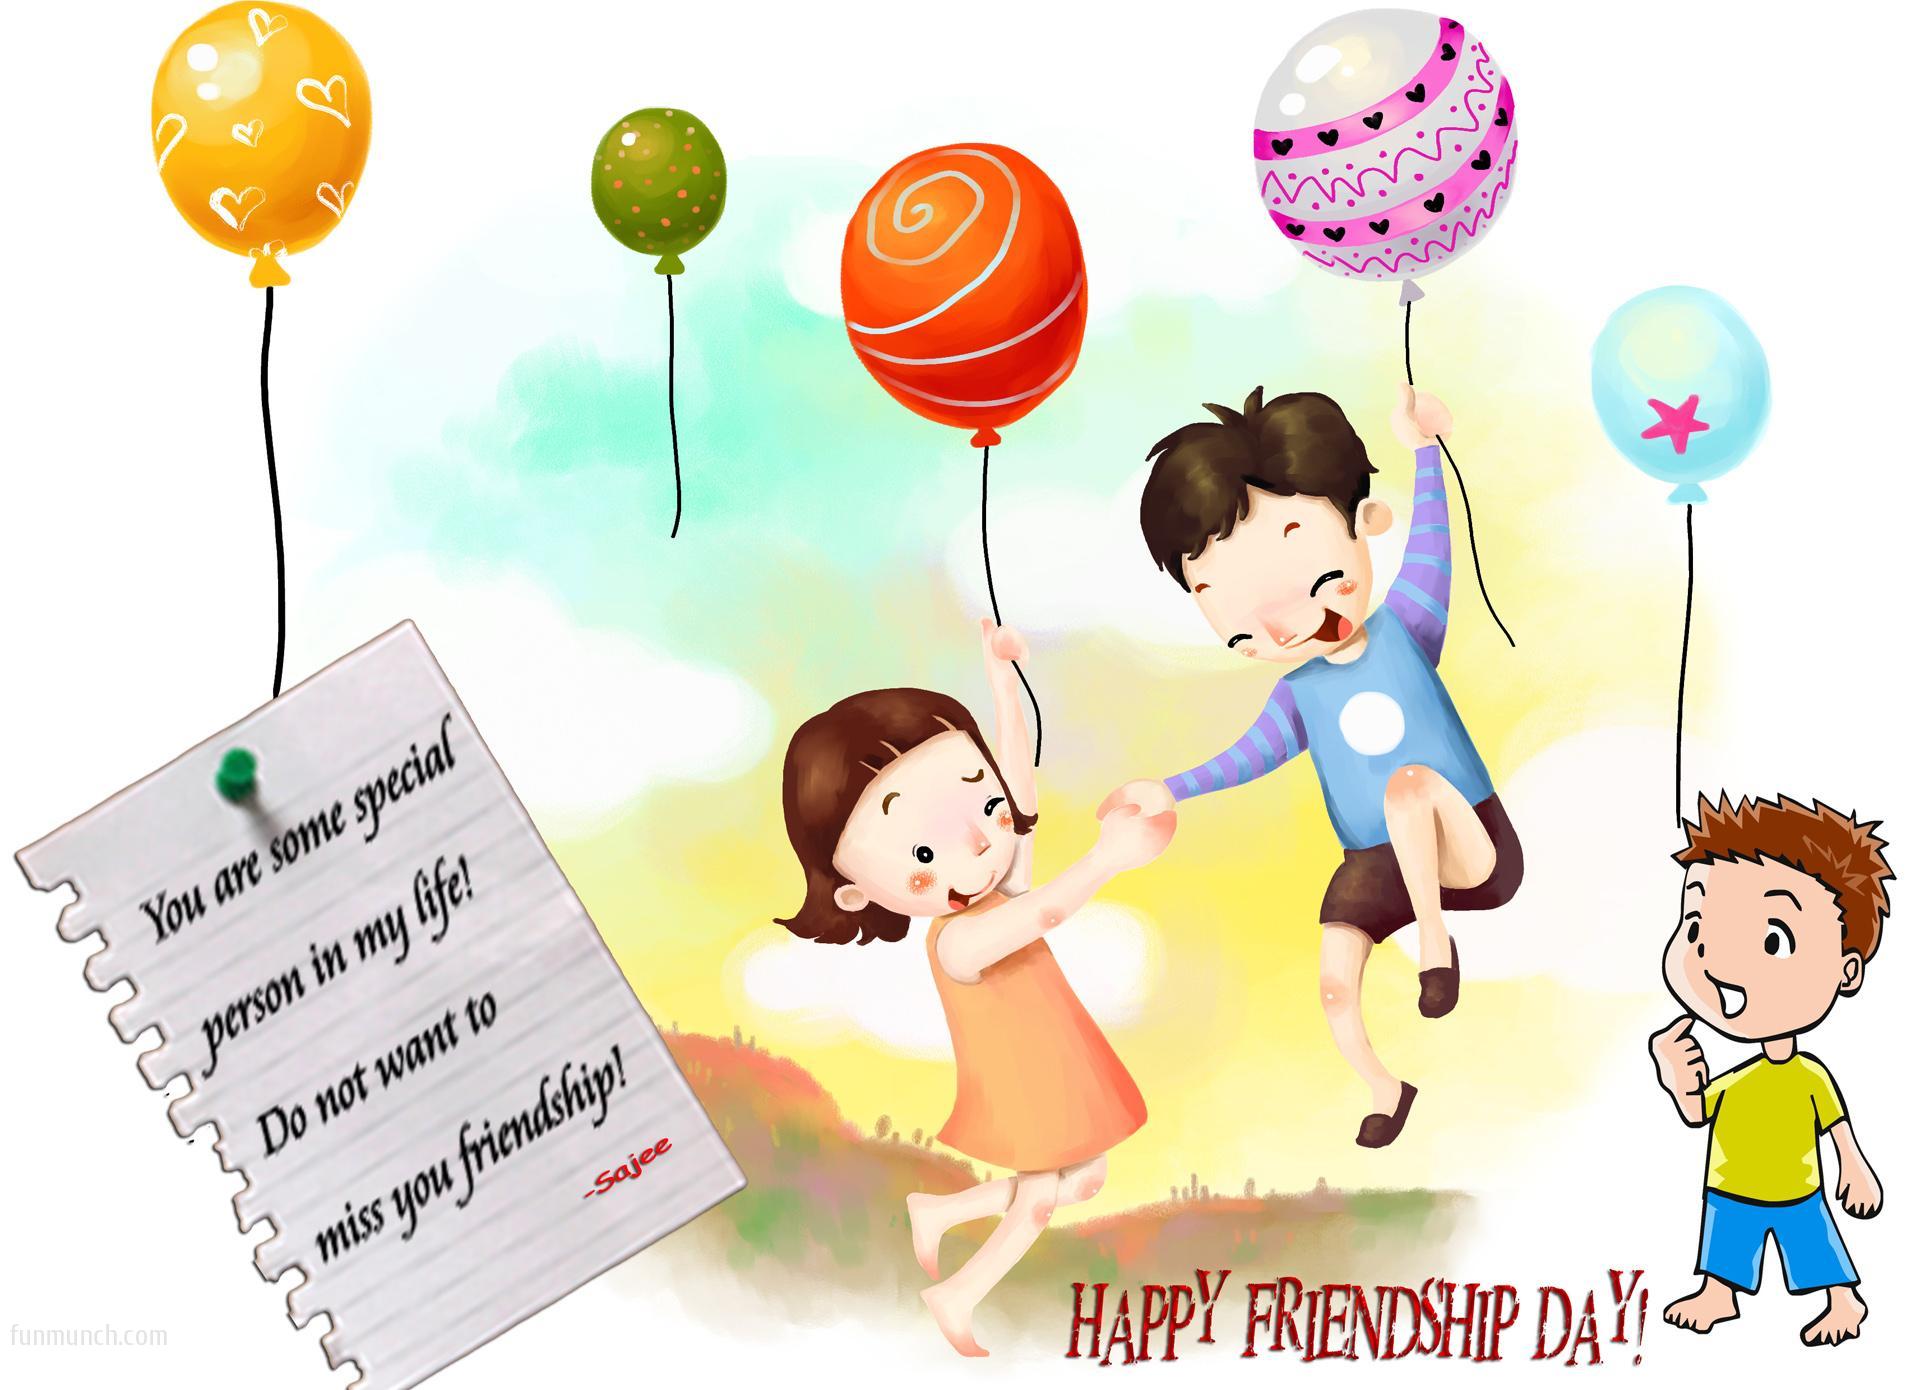 Cartoon Images Of Friendship Day Gallery